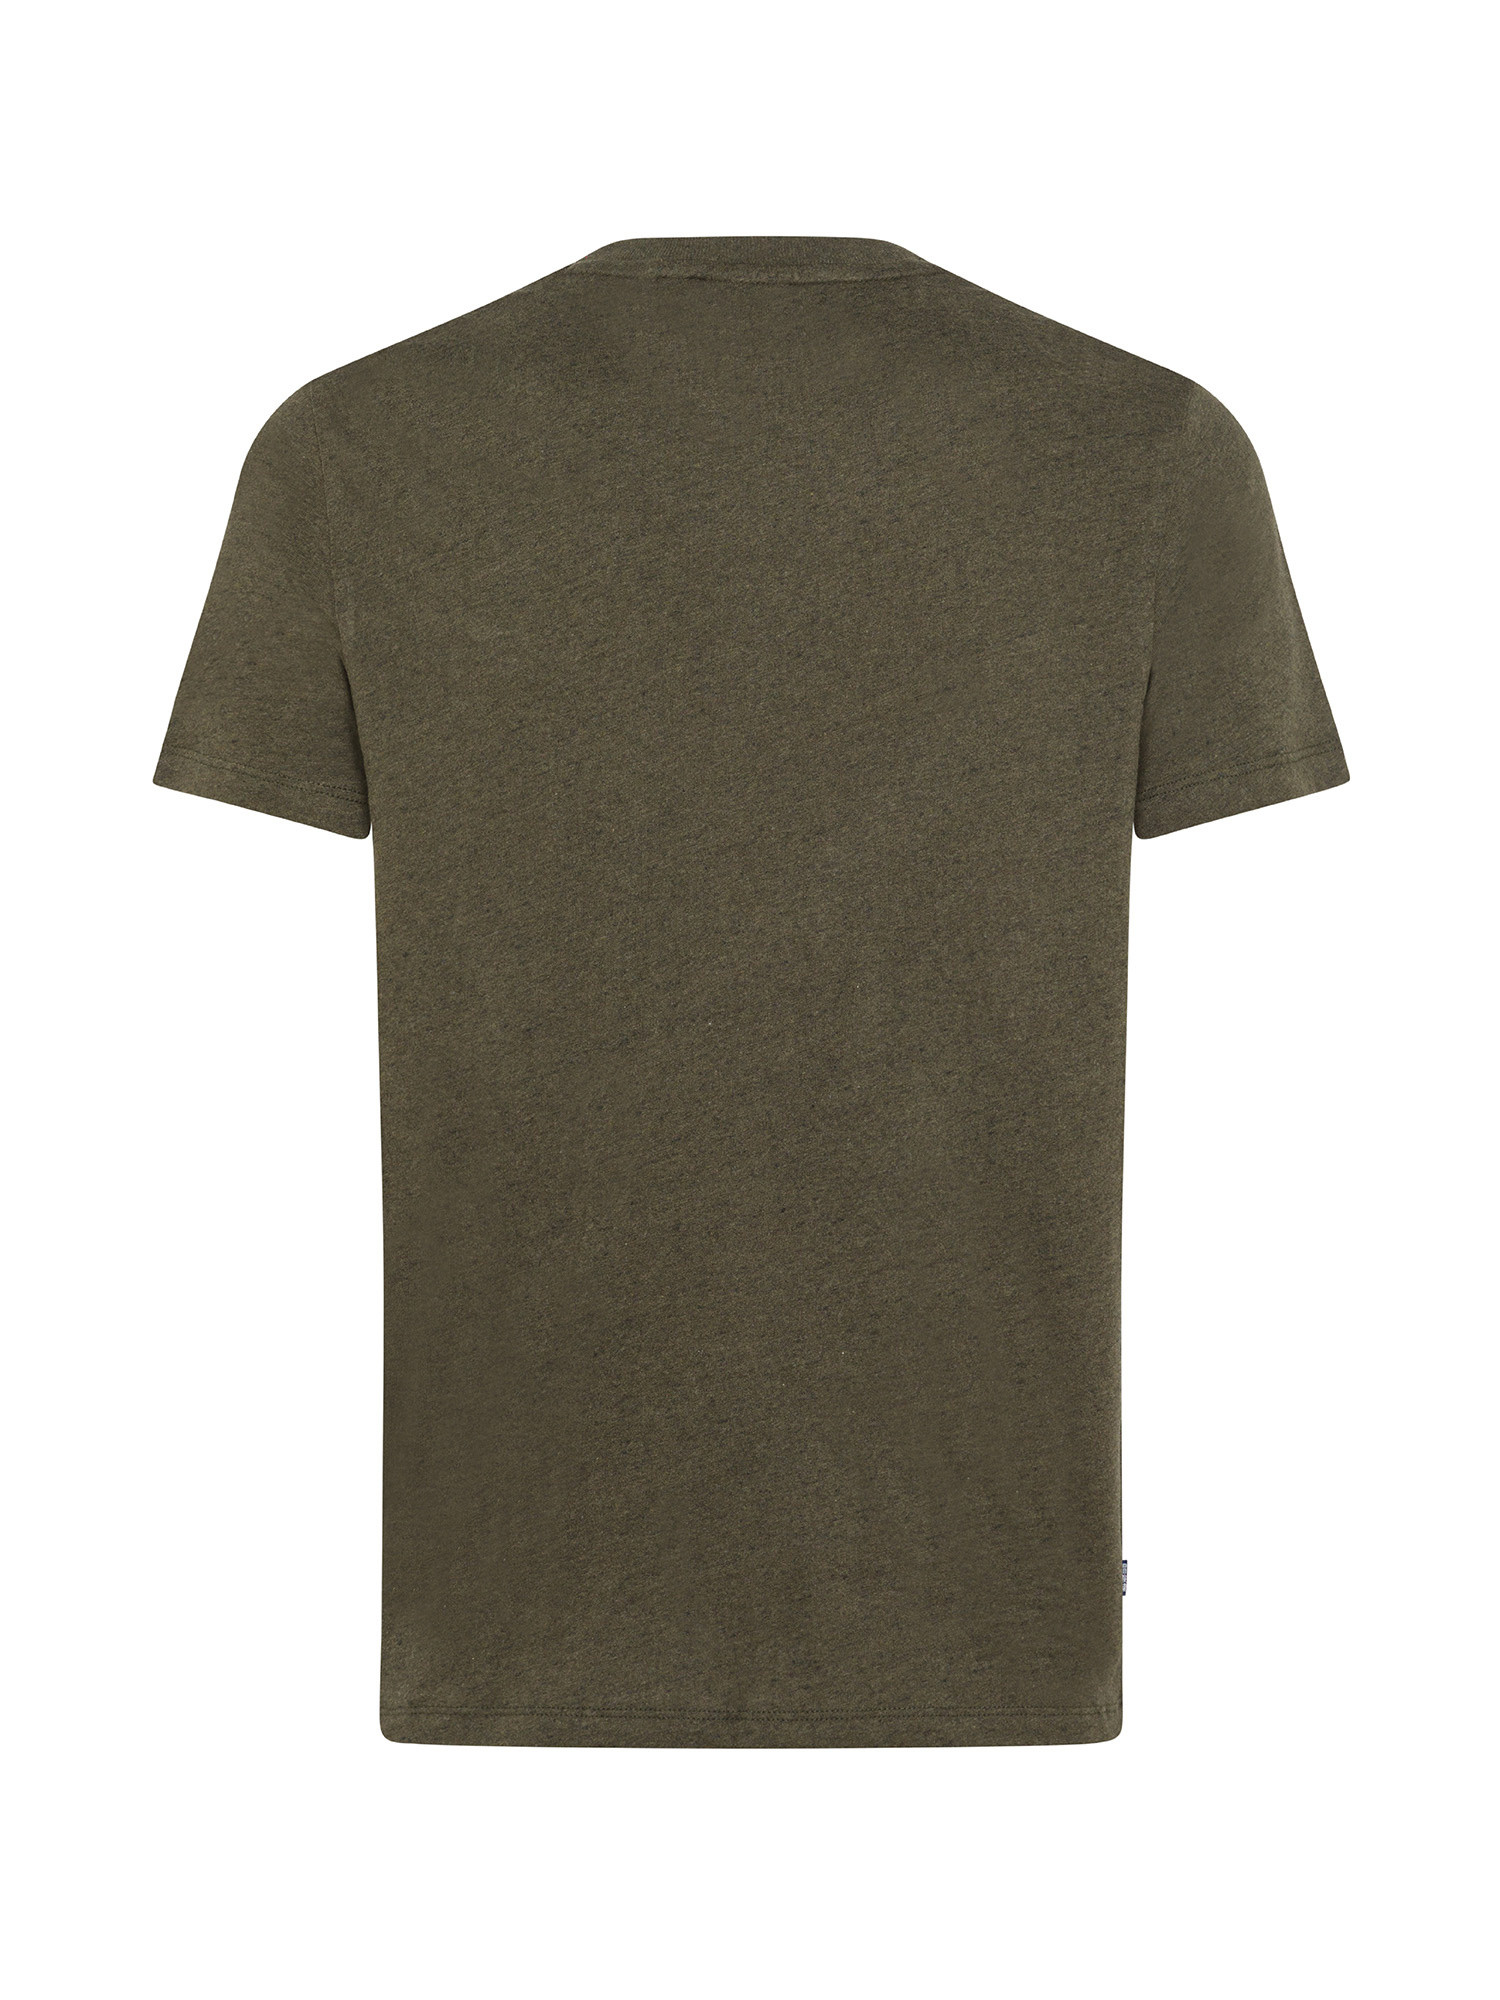 Superdry - T-shirt with embroidered logo, Olive Green, large image number 1